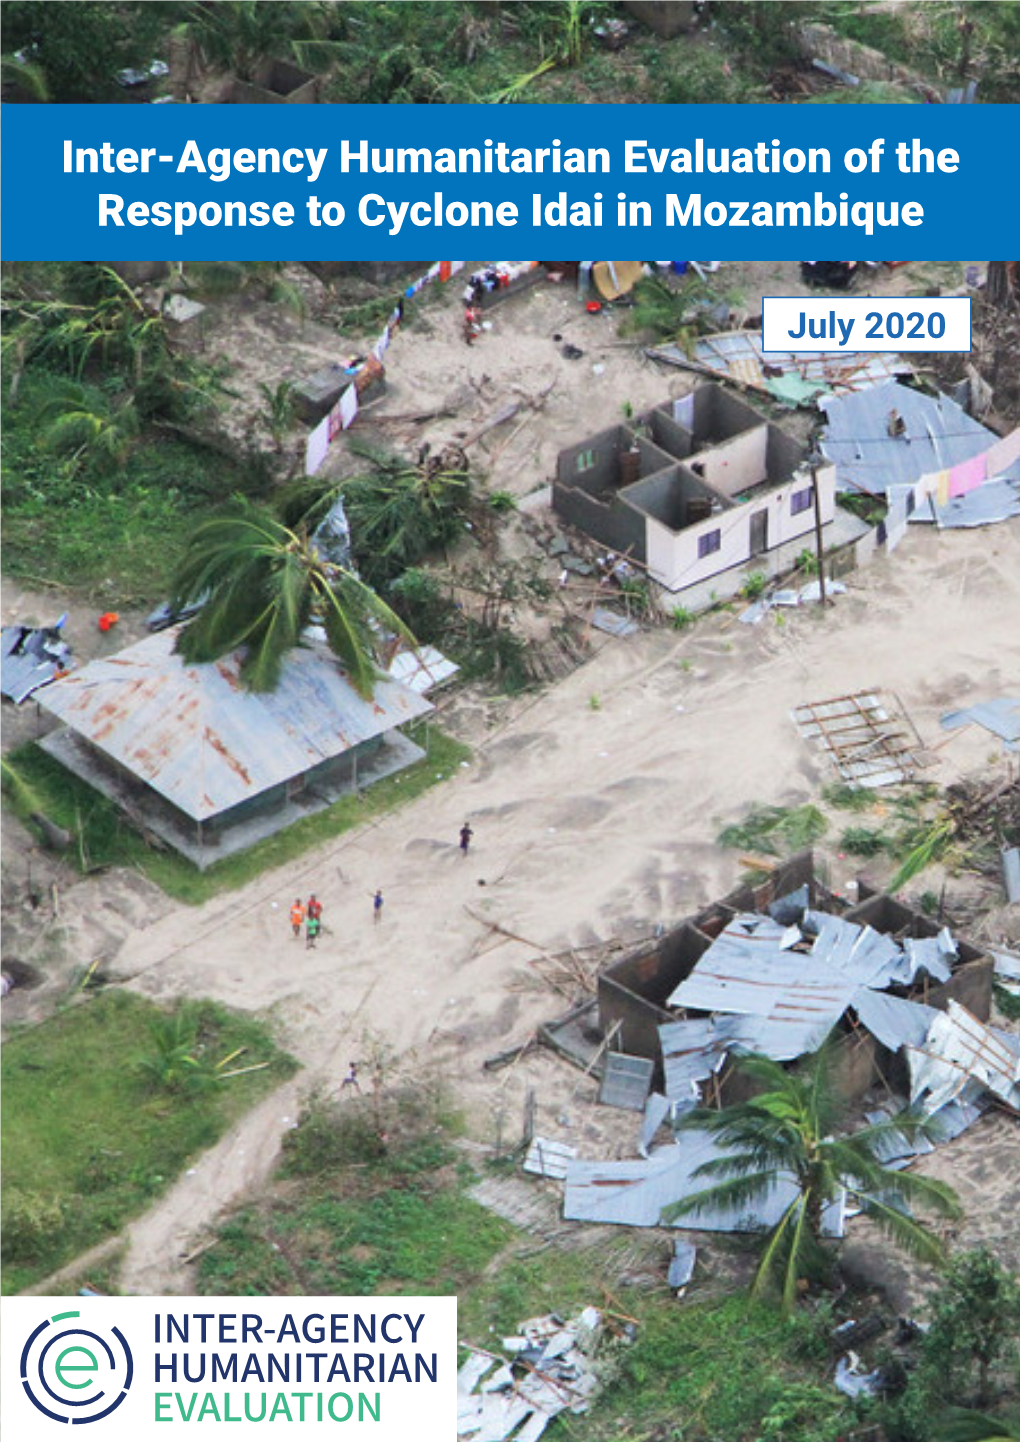 Inter-Agency Humanitarian Evaluation of the Response to Cyclone Idai in Mozambique